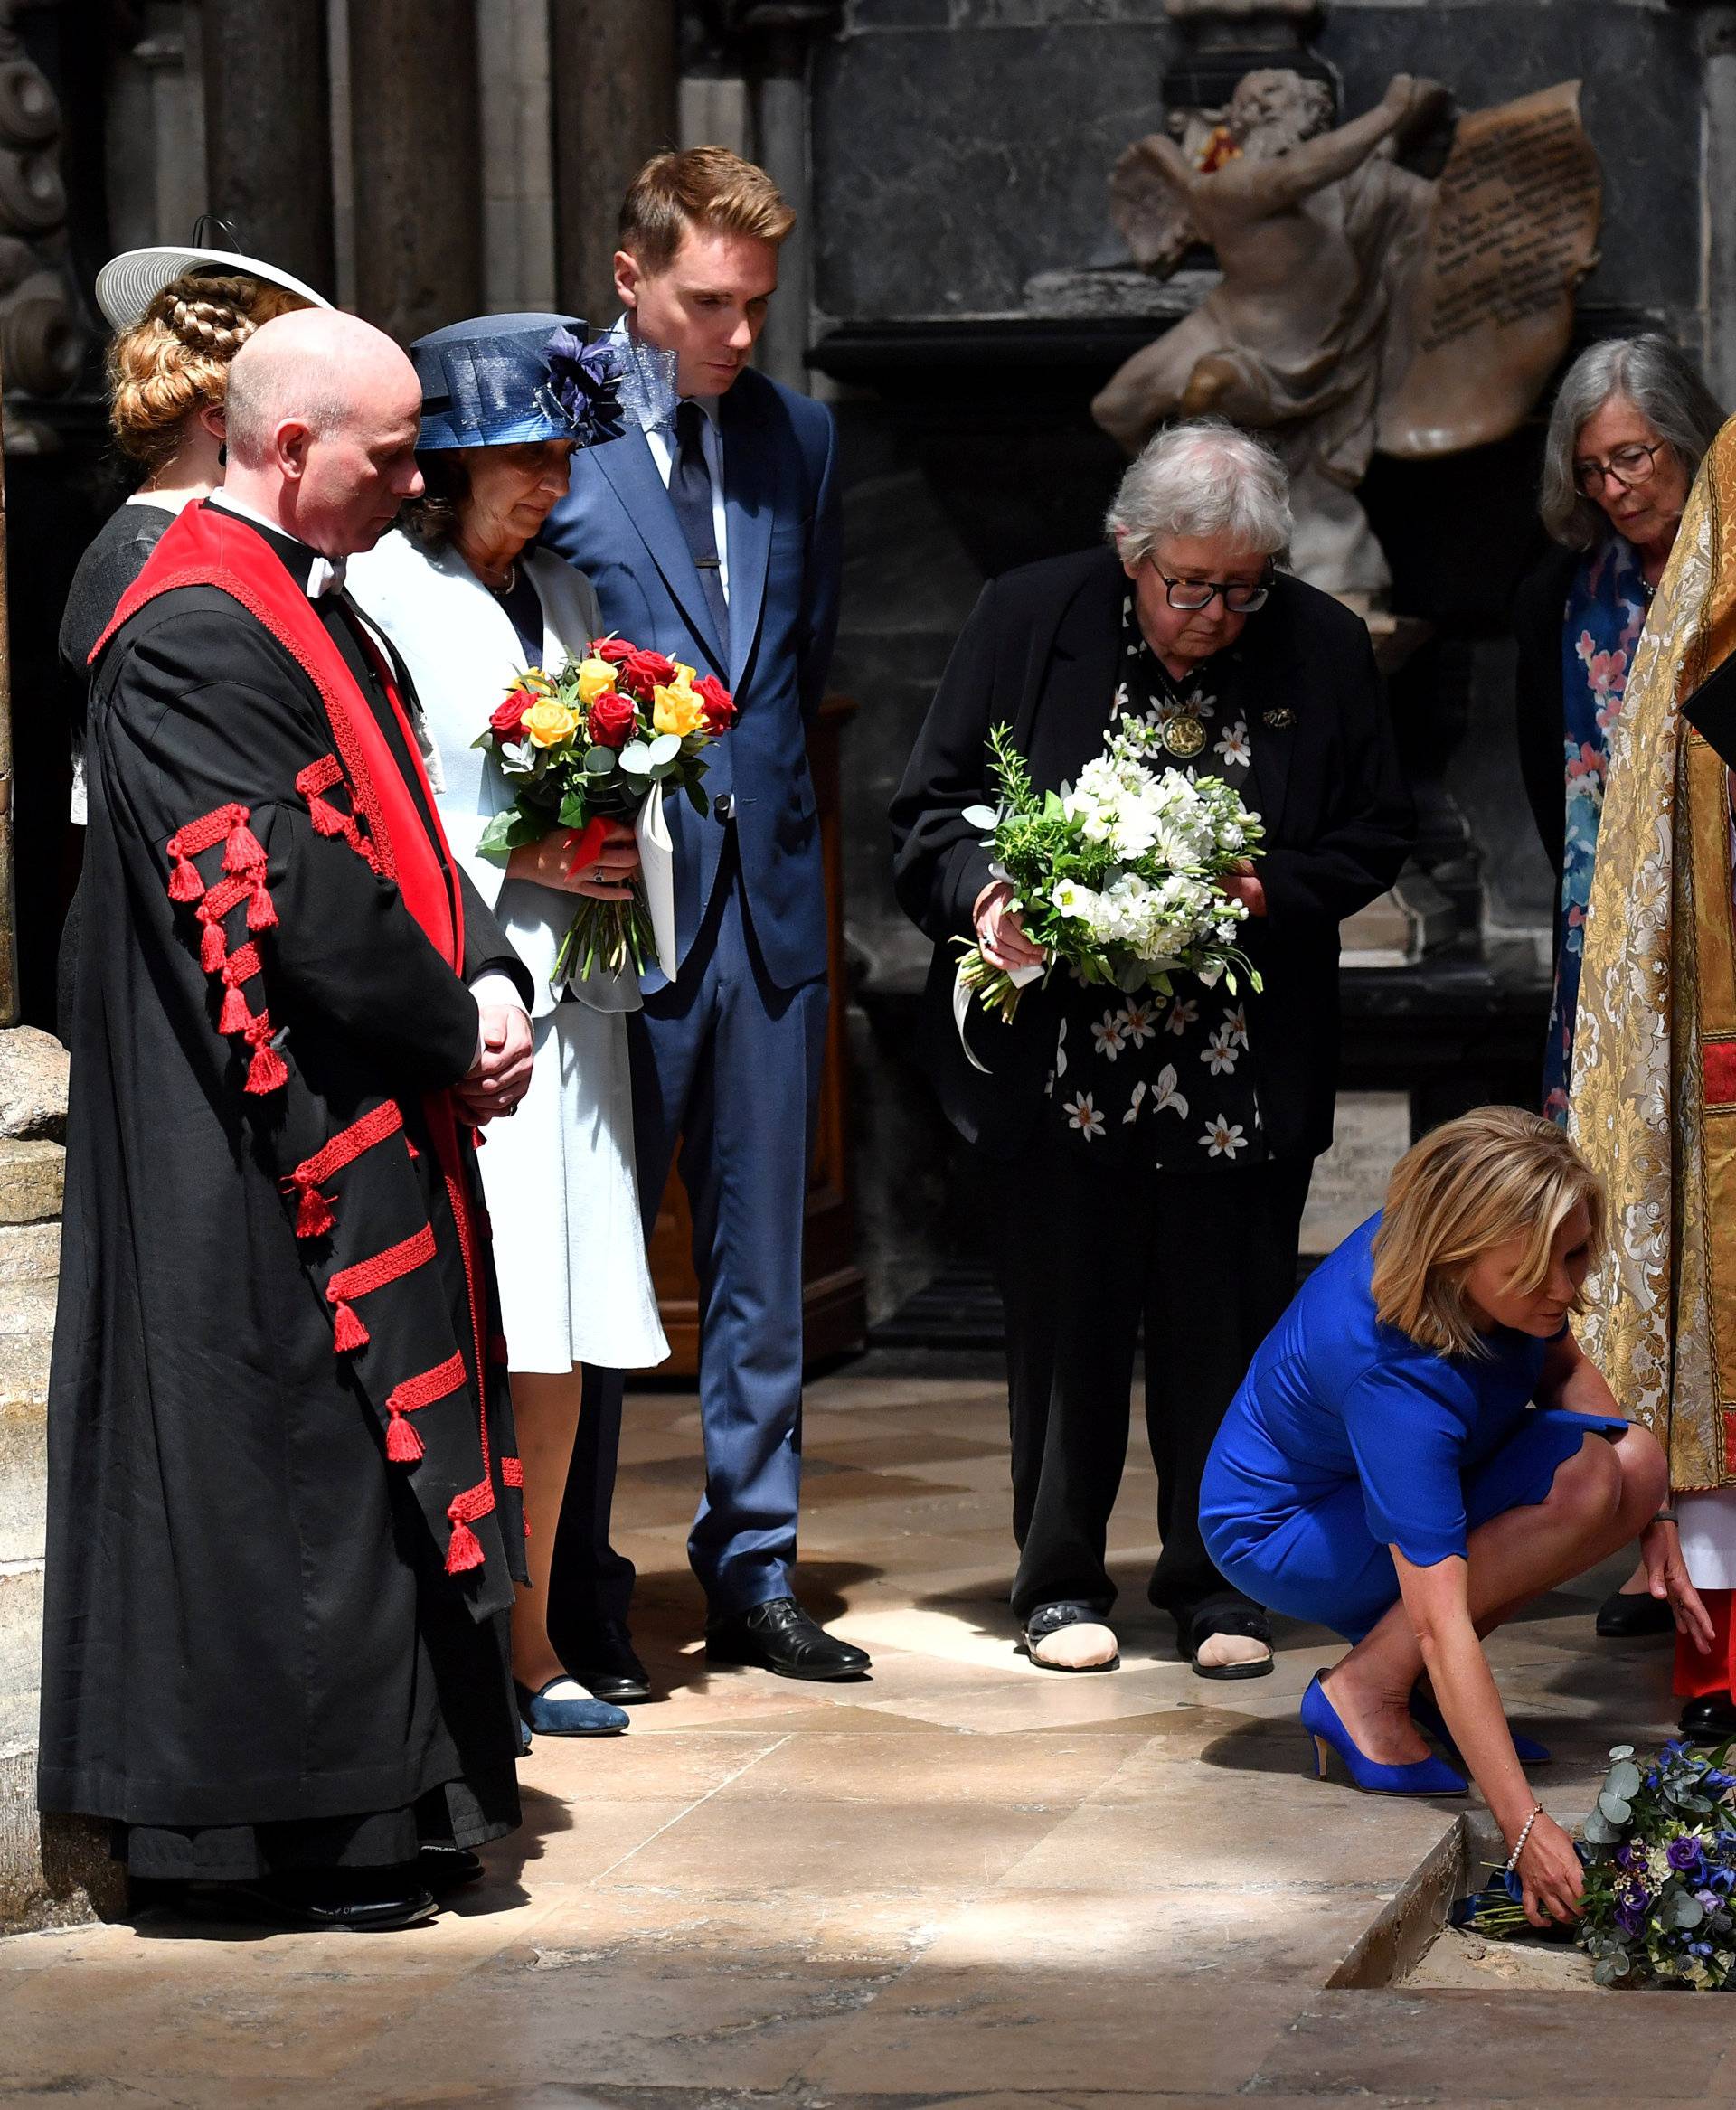 Dean of Westminster John Hall presides over the interment of the ashes of British scientist Stephen Hawking during a memorial service at Westminster Abbey in London